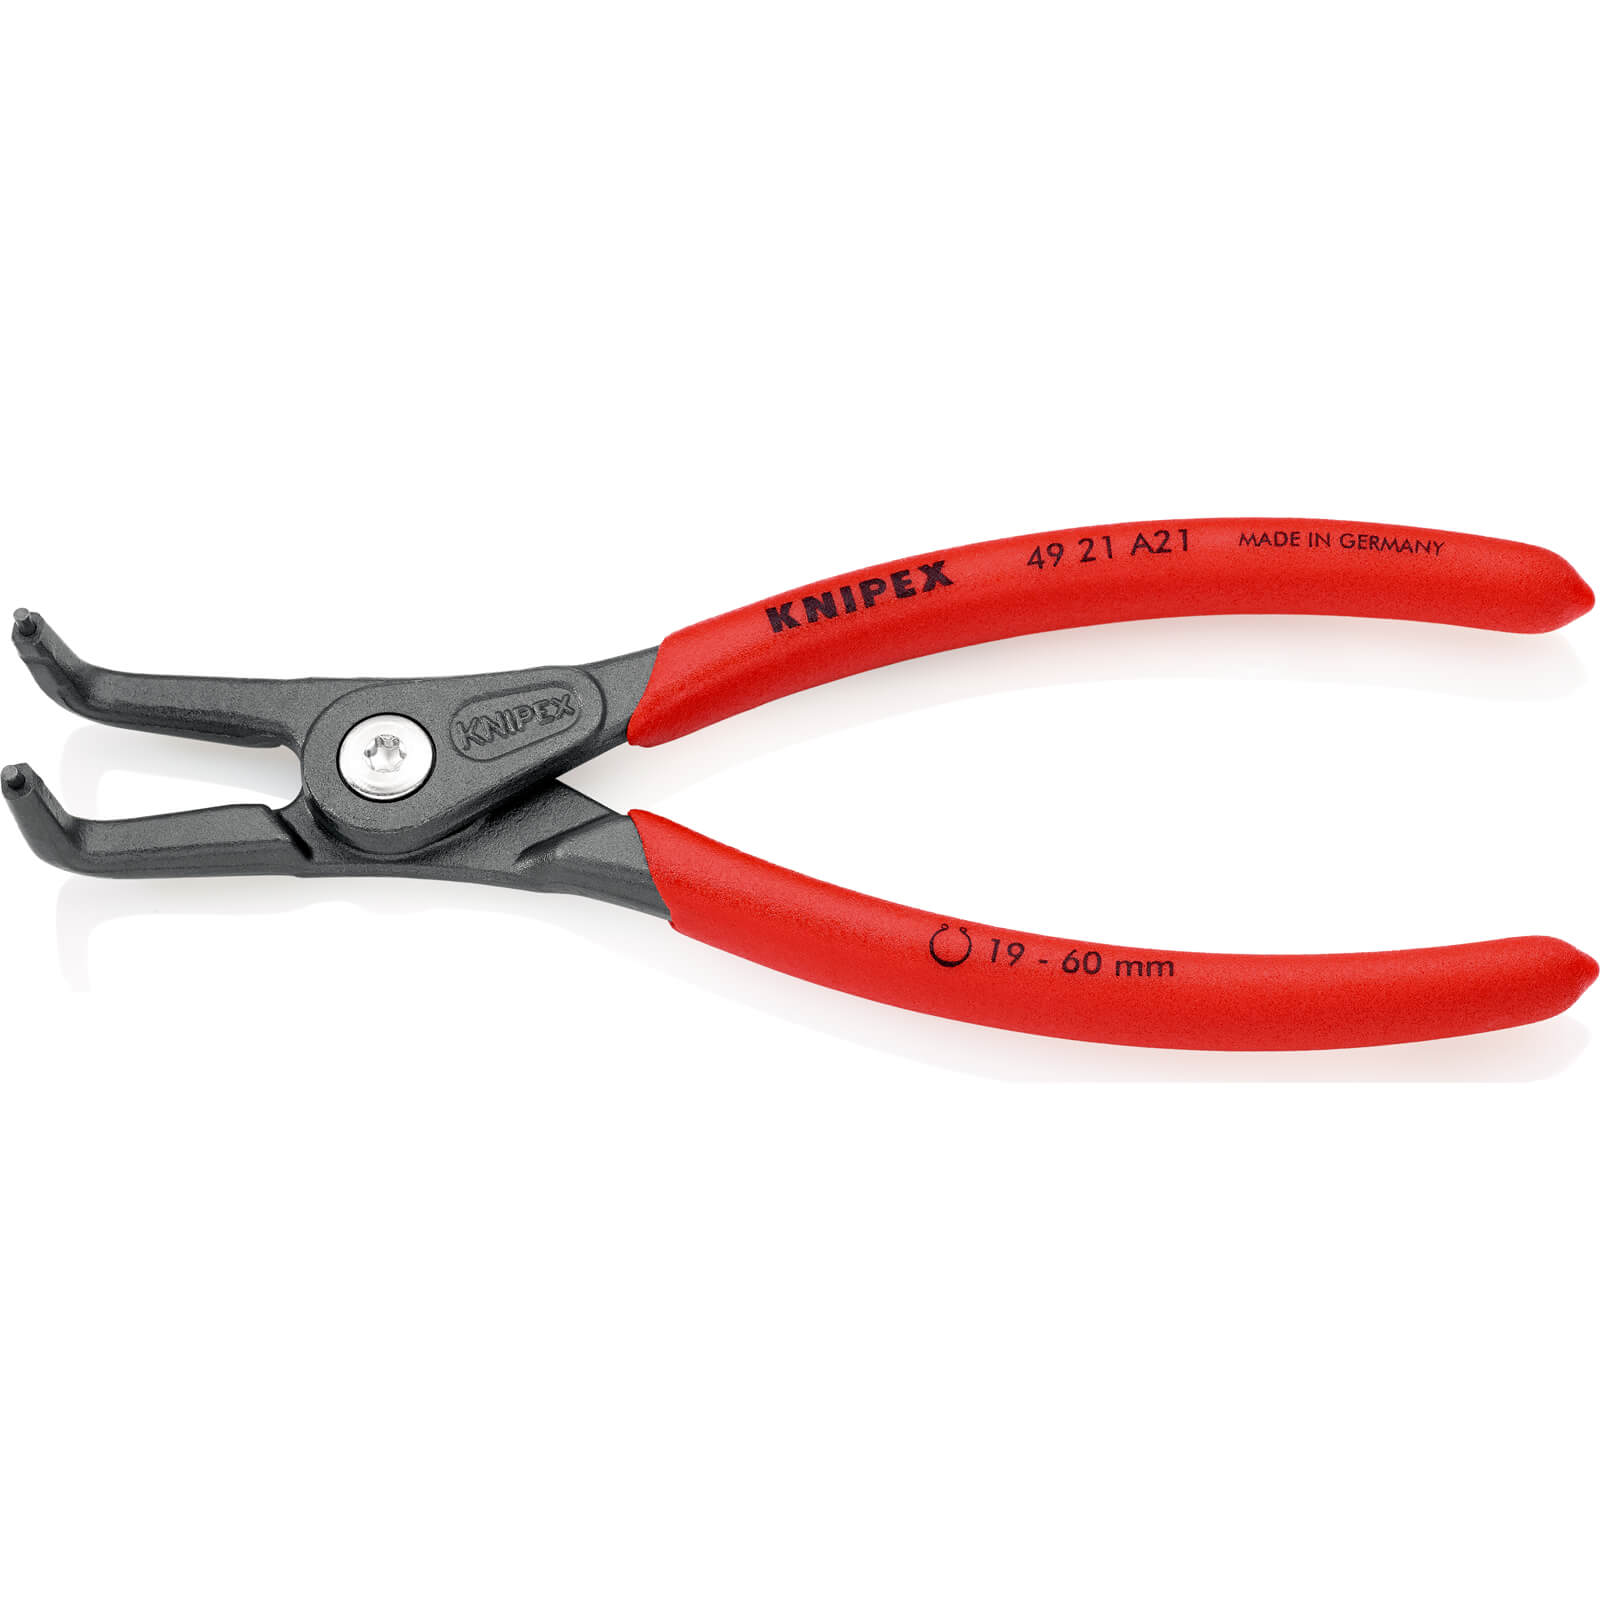 Image of Knipex 49 21 External 90 Degree Precision Circlip Pliers 19mm - 60mm